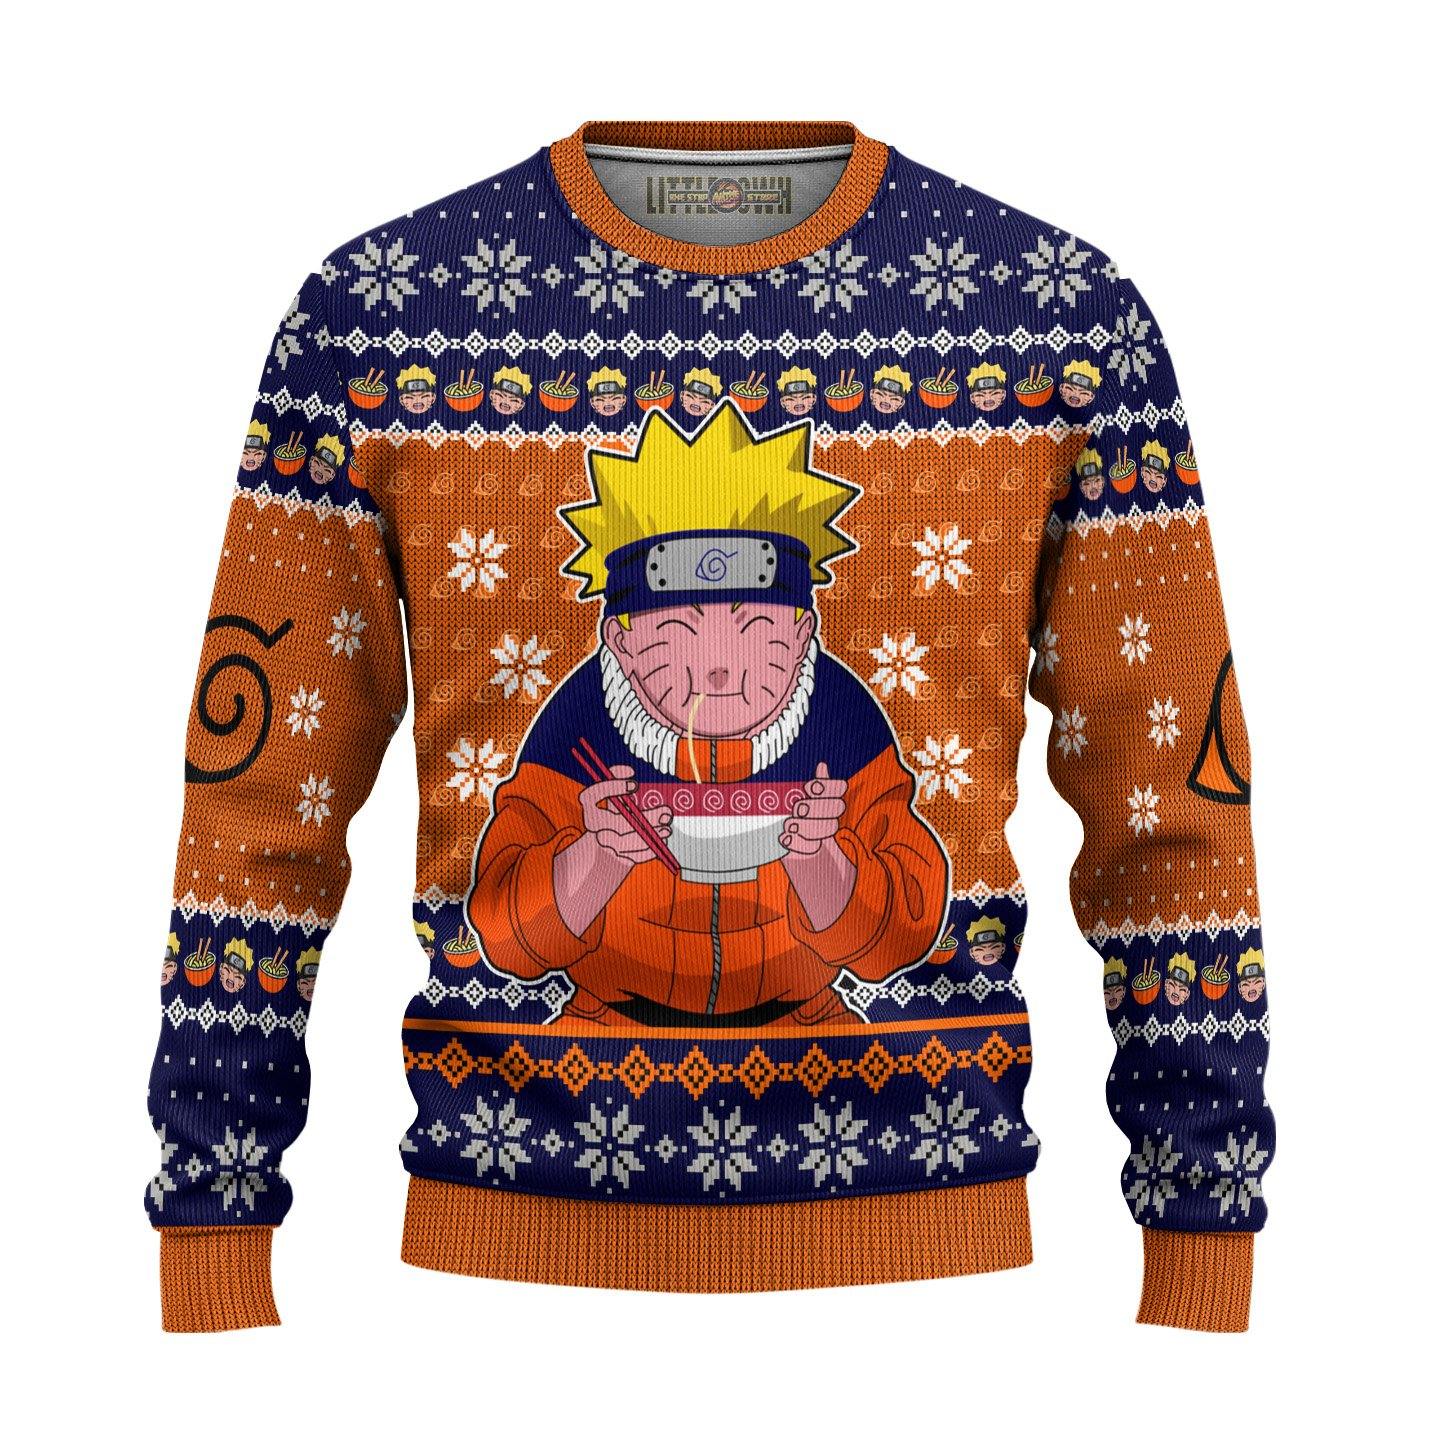 Dragon Ball Anime Ugly Christmas Sweater Red Characters New Design